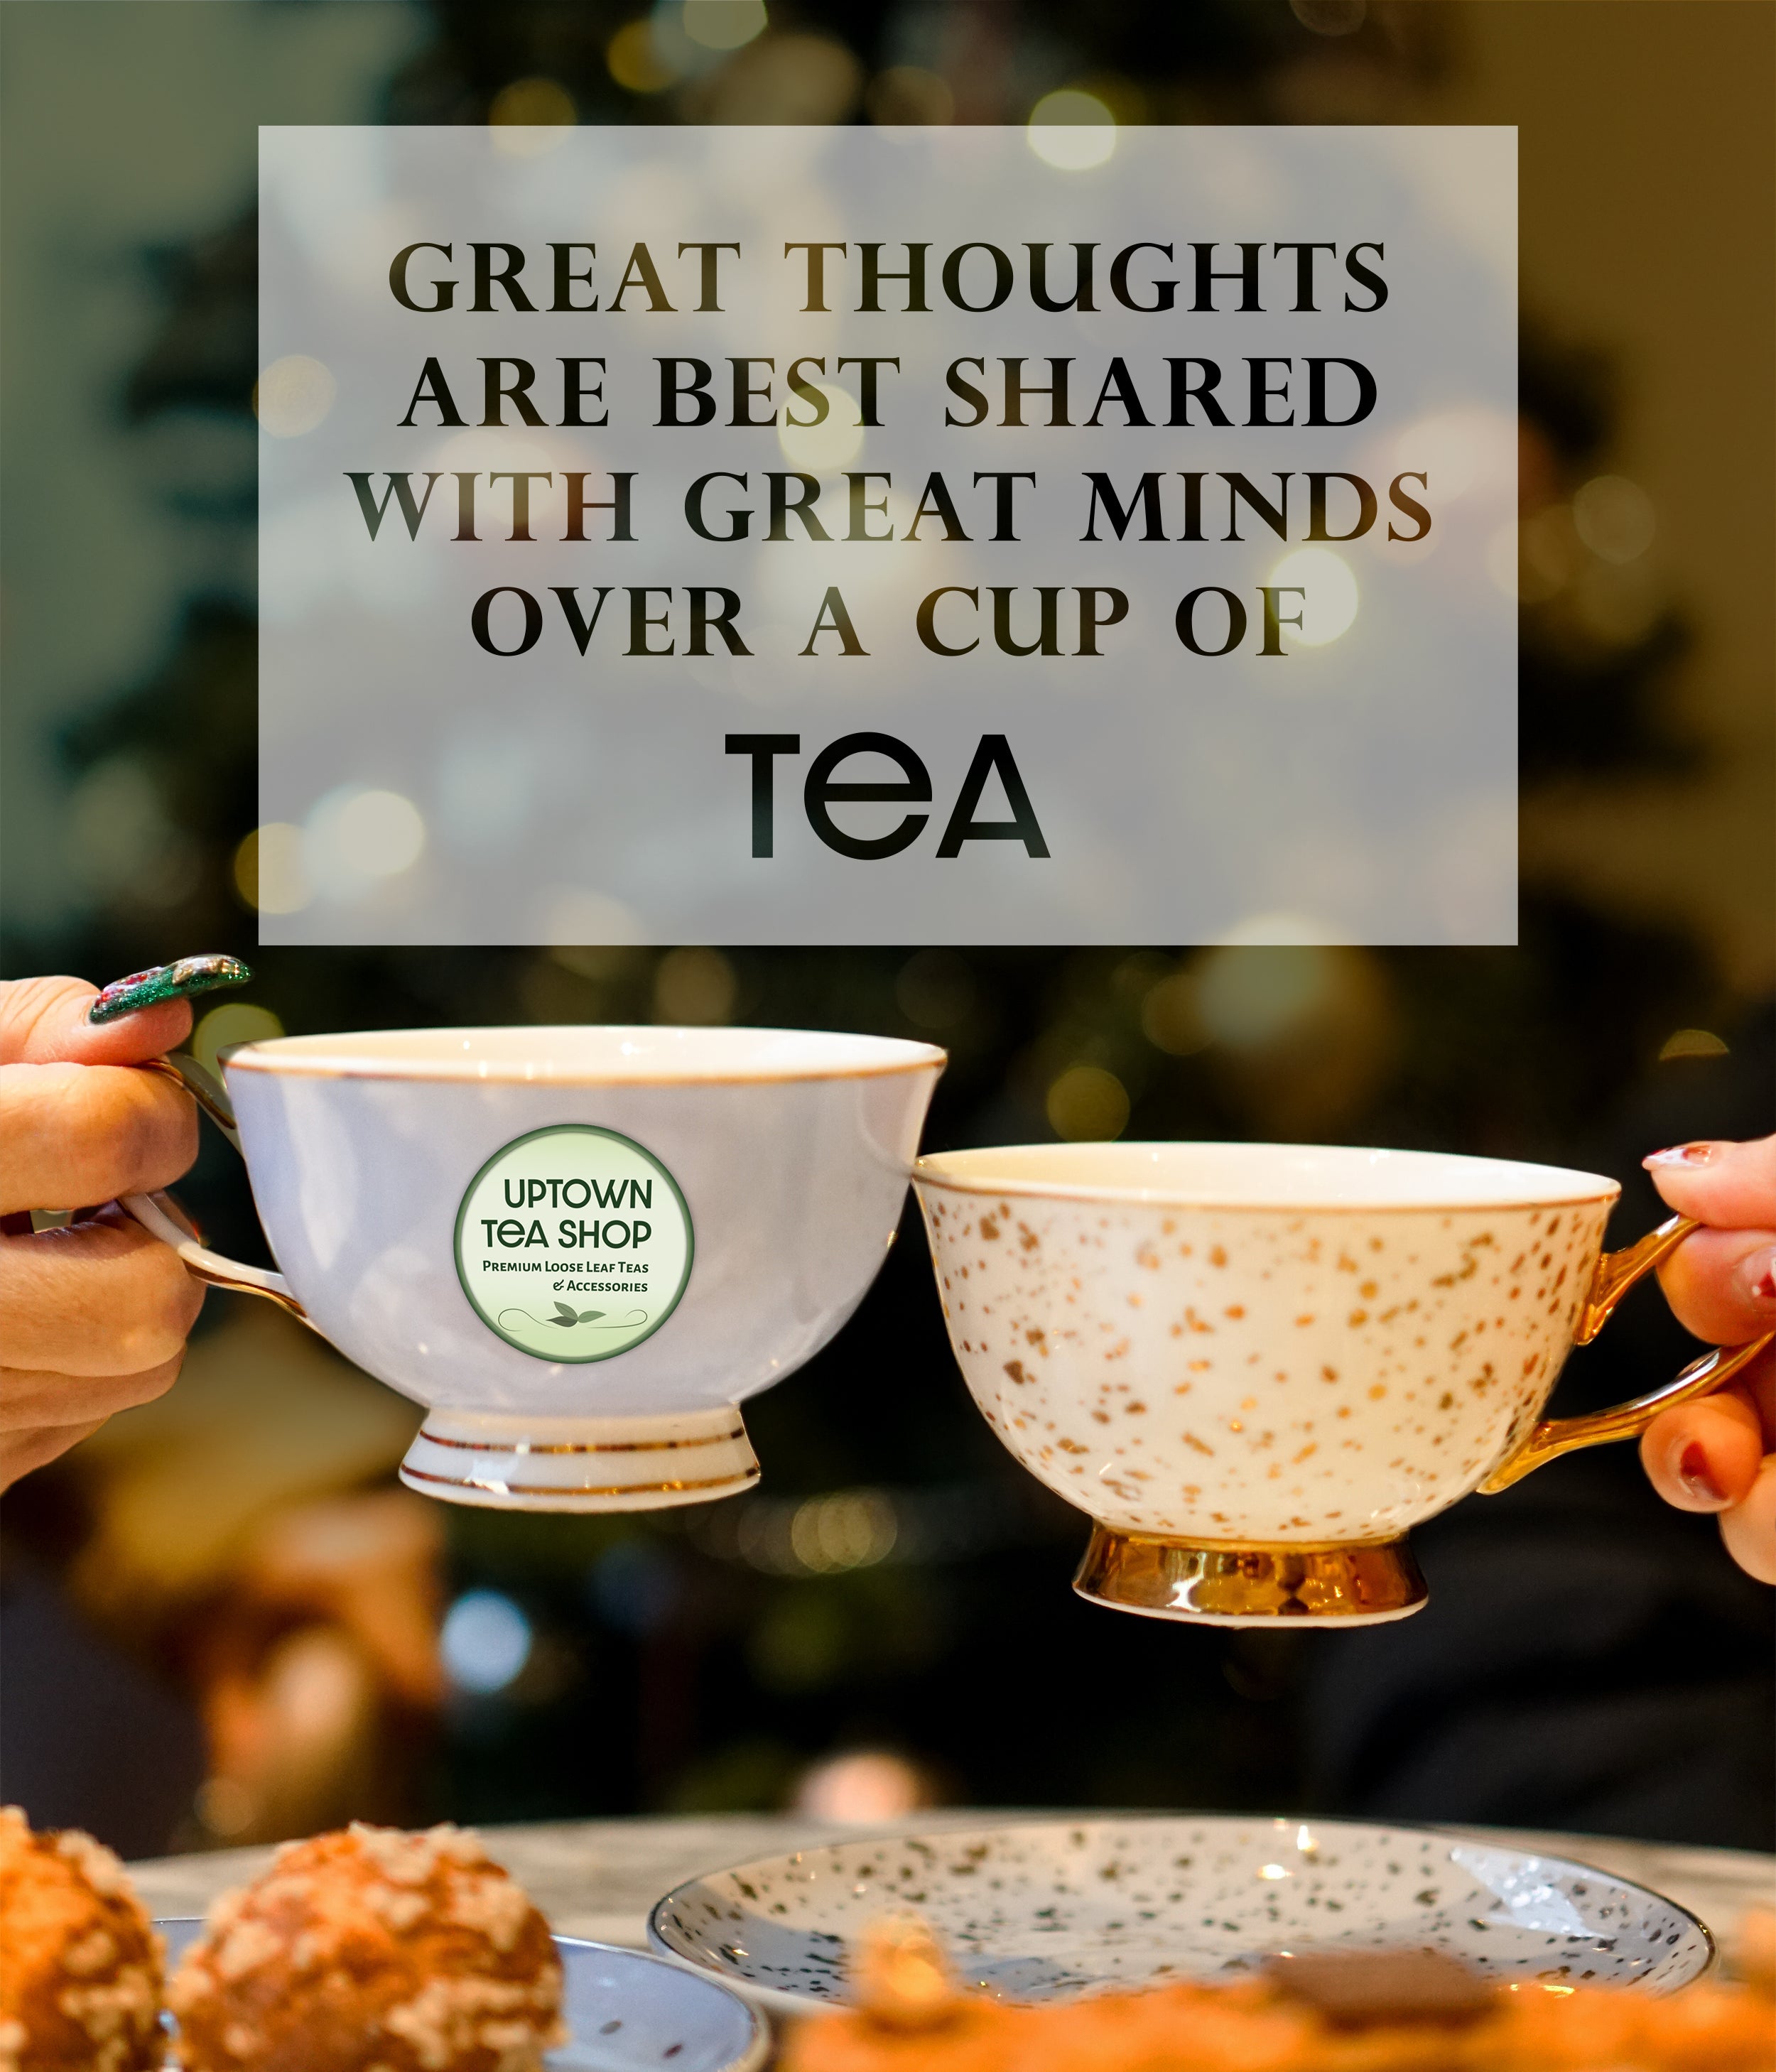 Uptown Tea Shop - Great Thoughts Are Best Shared With Great Minds Over a Cup of Tea